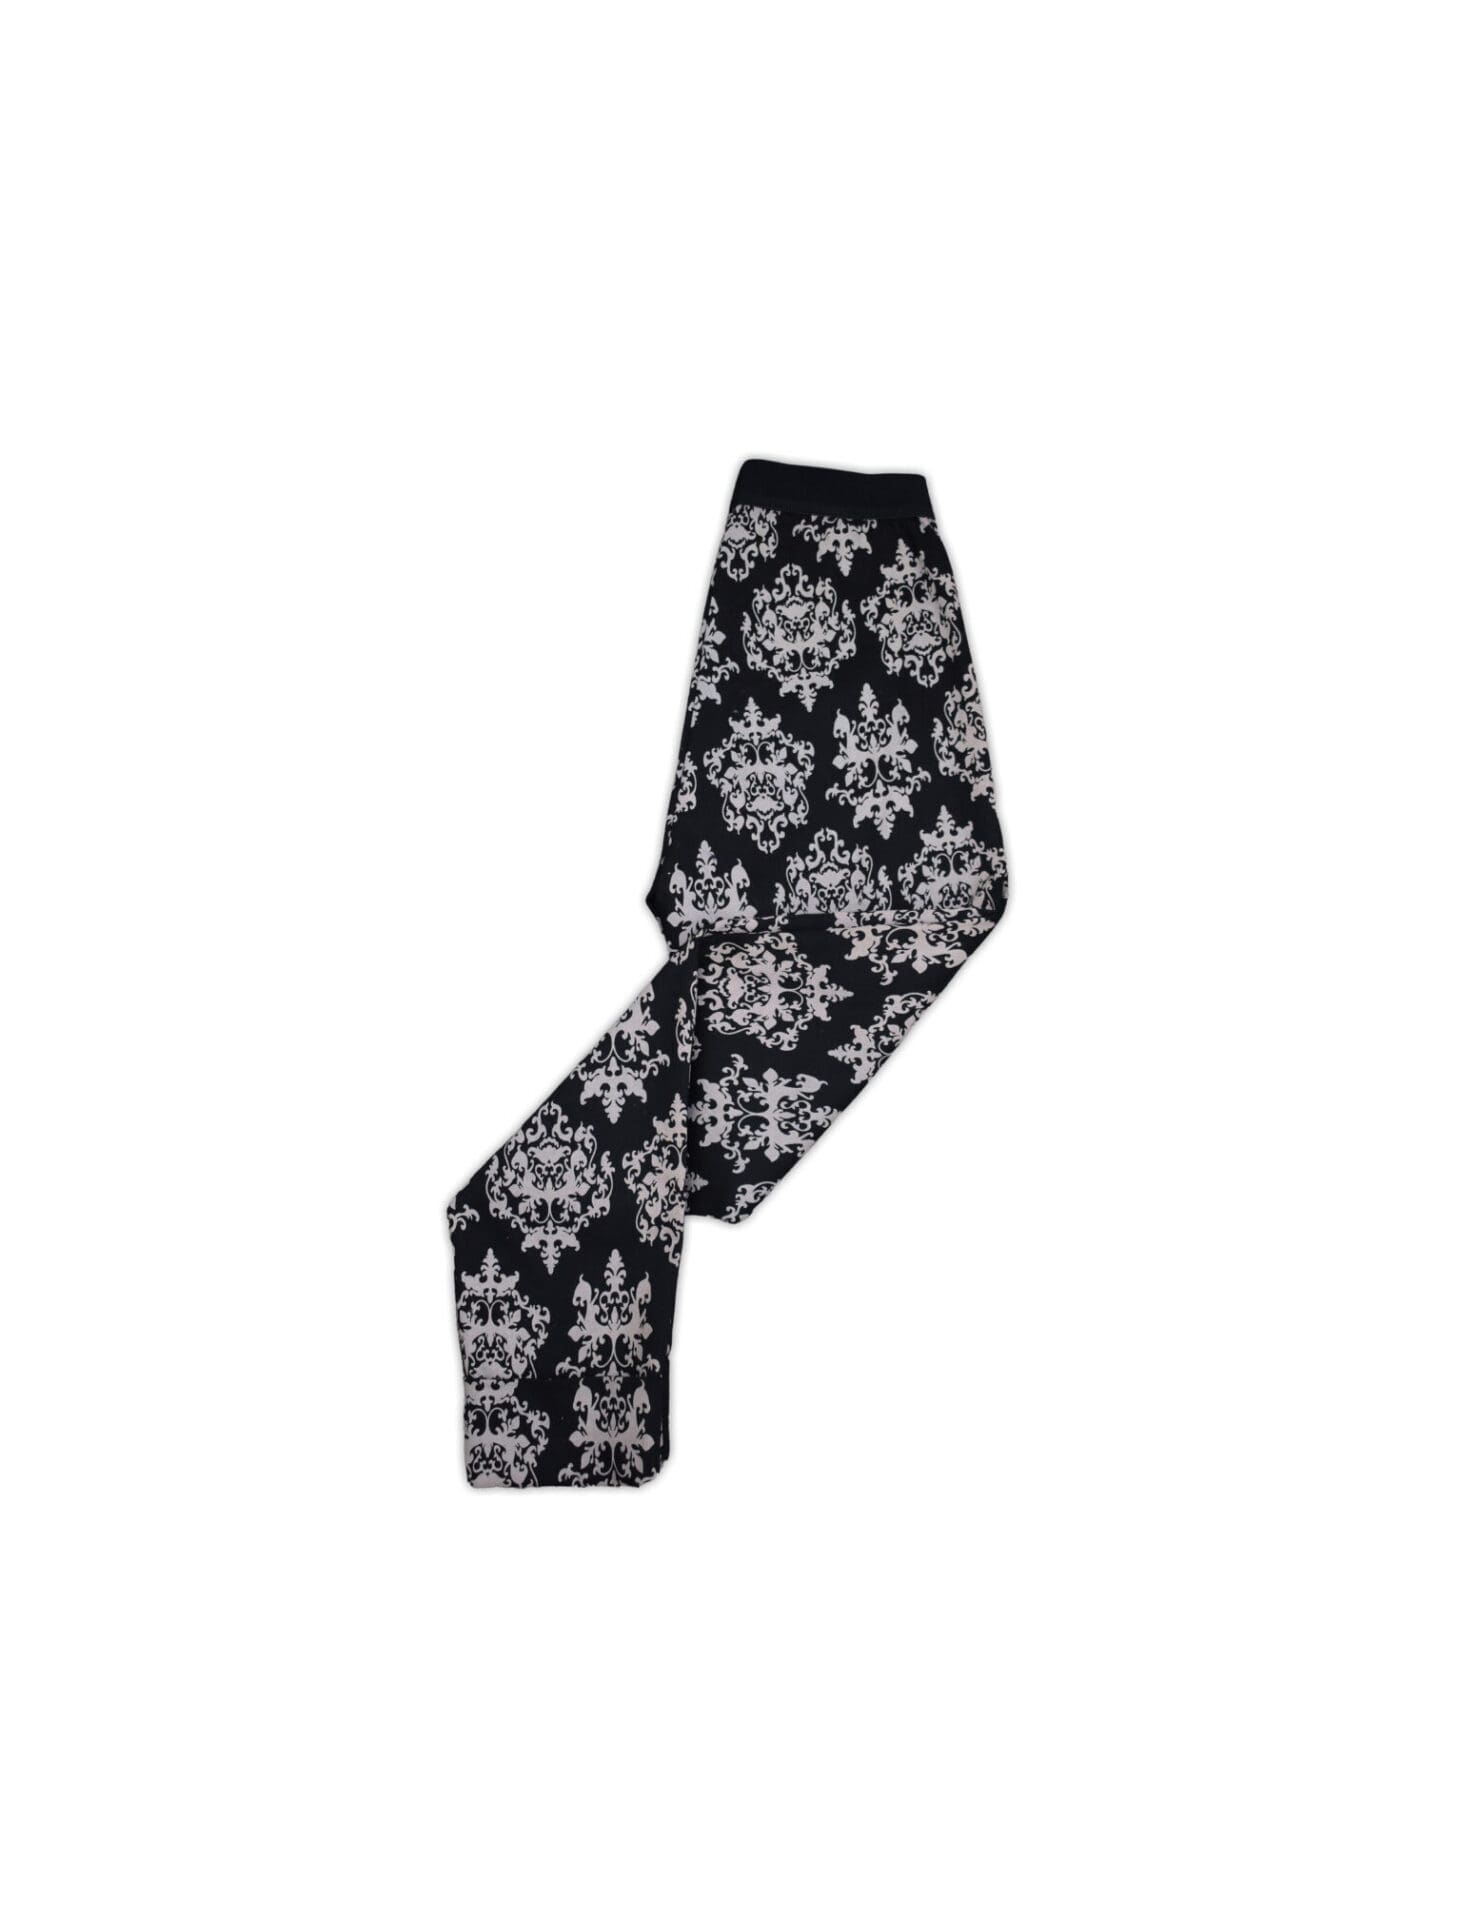 Comfortable, pull on jegging pant with cuffed hem, elastic waist, XS, black and beige print.